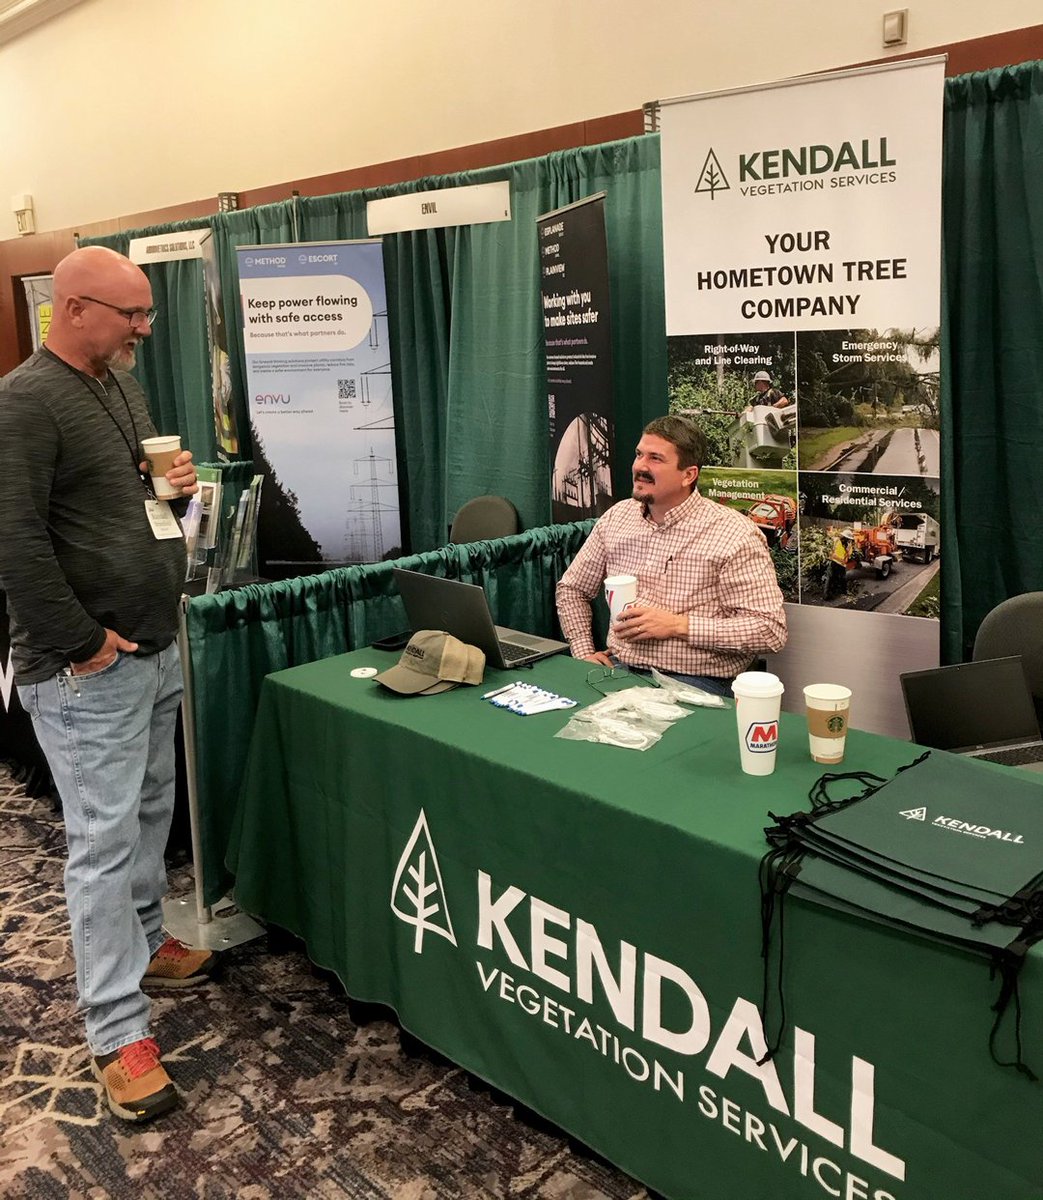 The 2023 Indiana Arborist Association Annual Conference is now taking place in Indianapolis. It's excellent to share ideas and learn from others about how to move our industry ahead.

#kendallvegetation #safetyfirst #utilitytreeservice  #indiana #safetyfirstalways